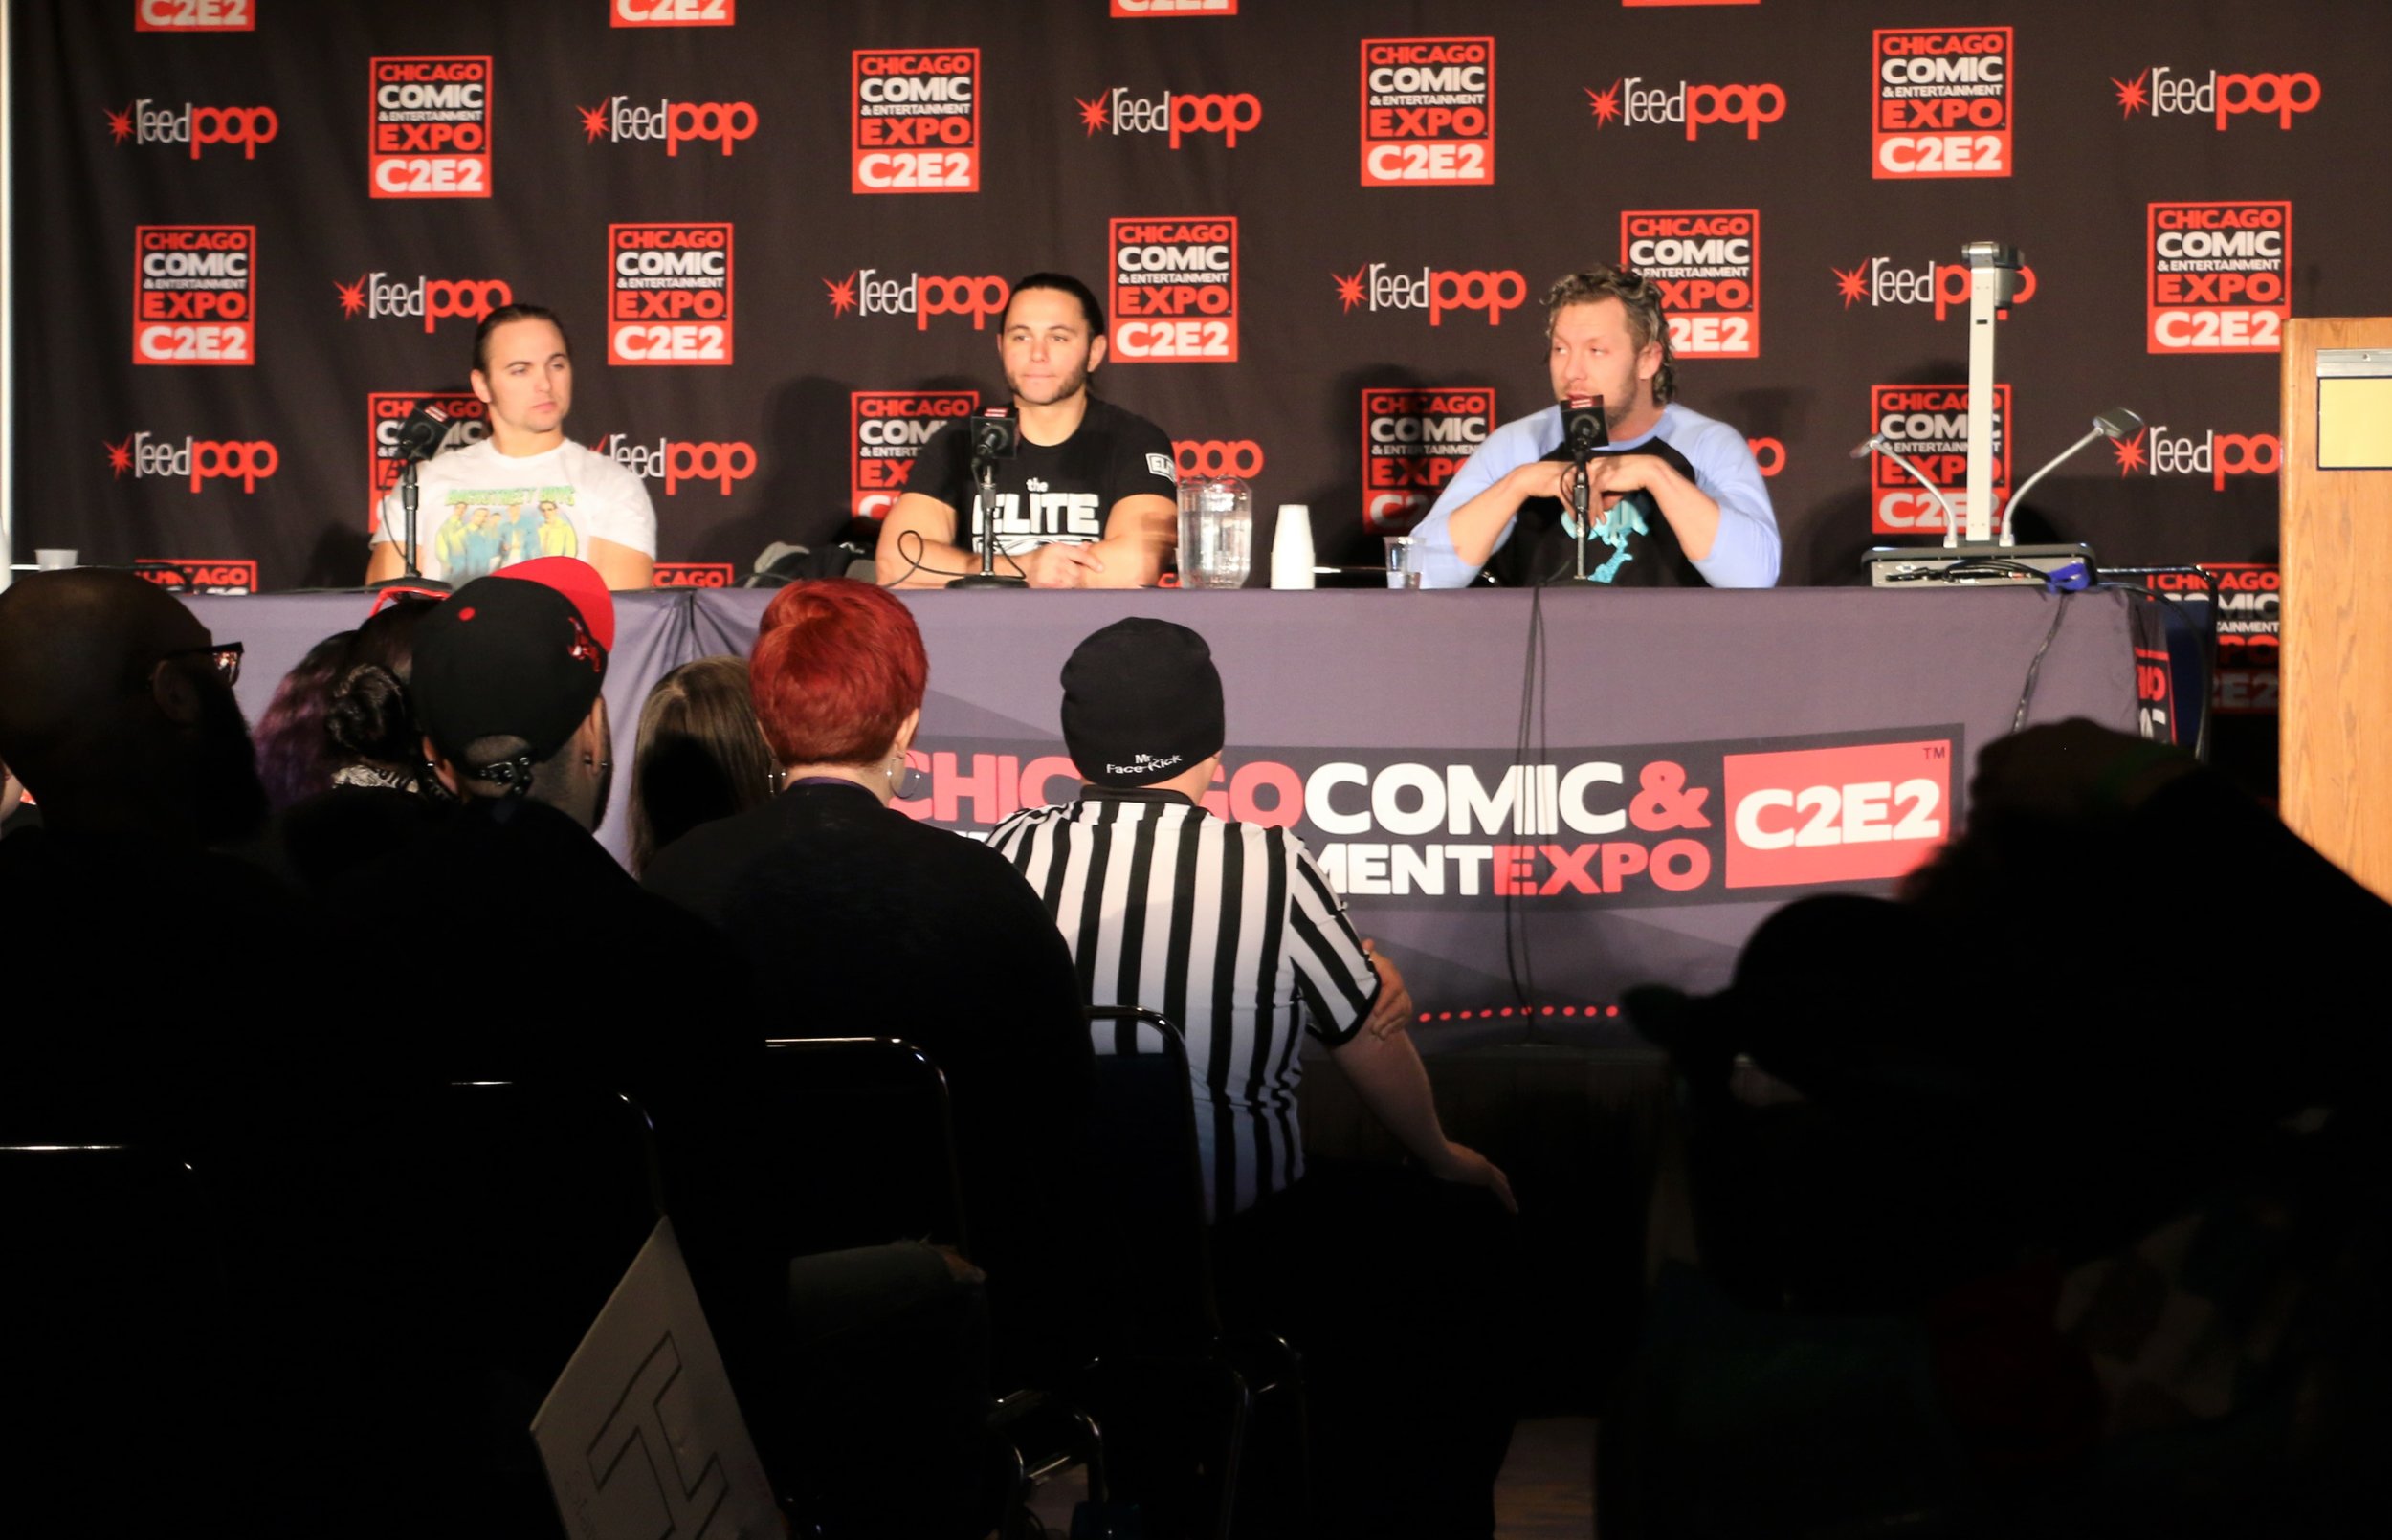  A packed conference room watches the Young Bucks and Kenny Omega during the All Elite Wrestling panel. 